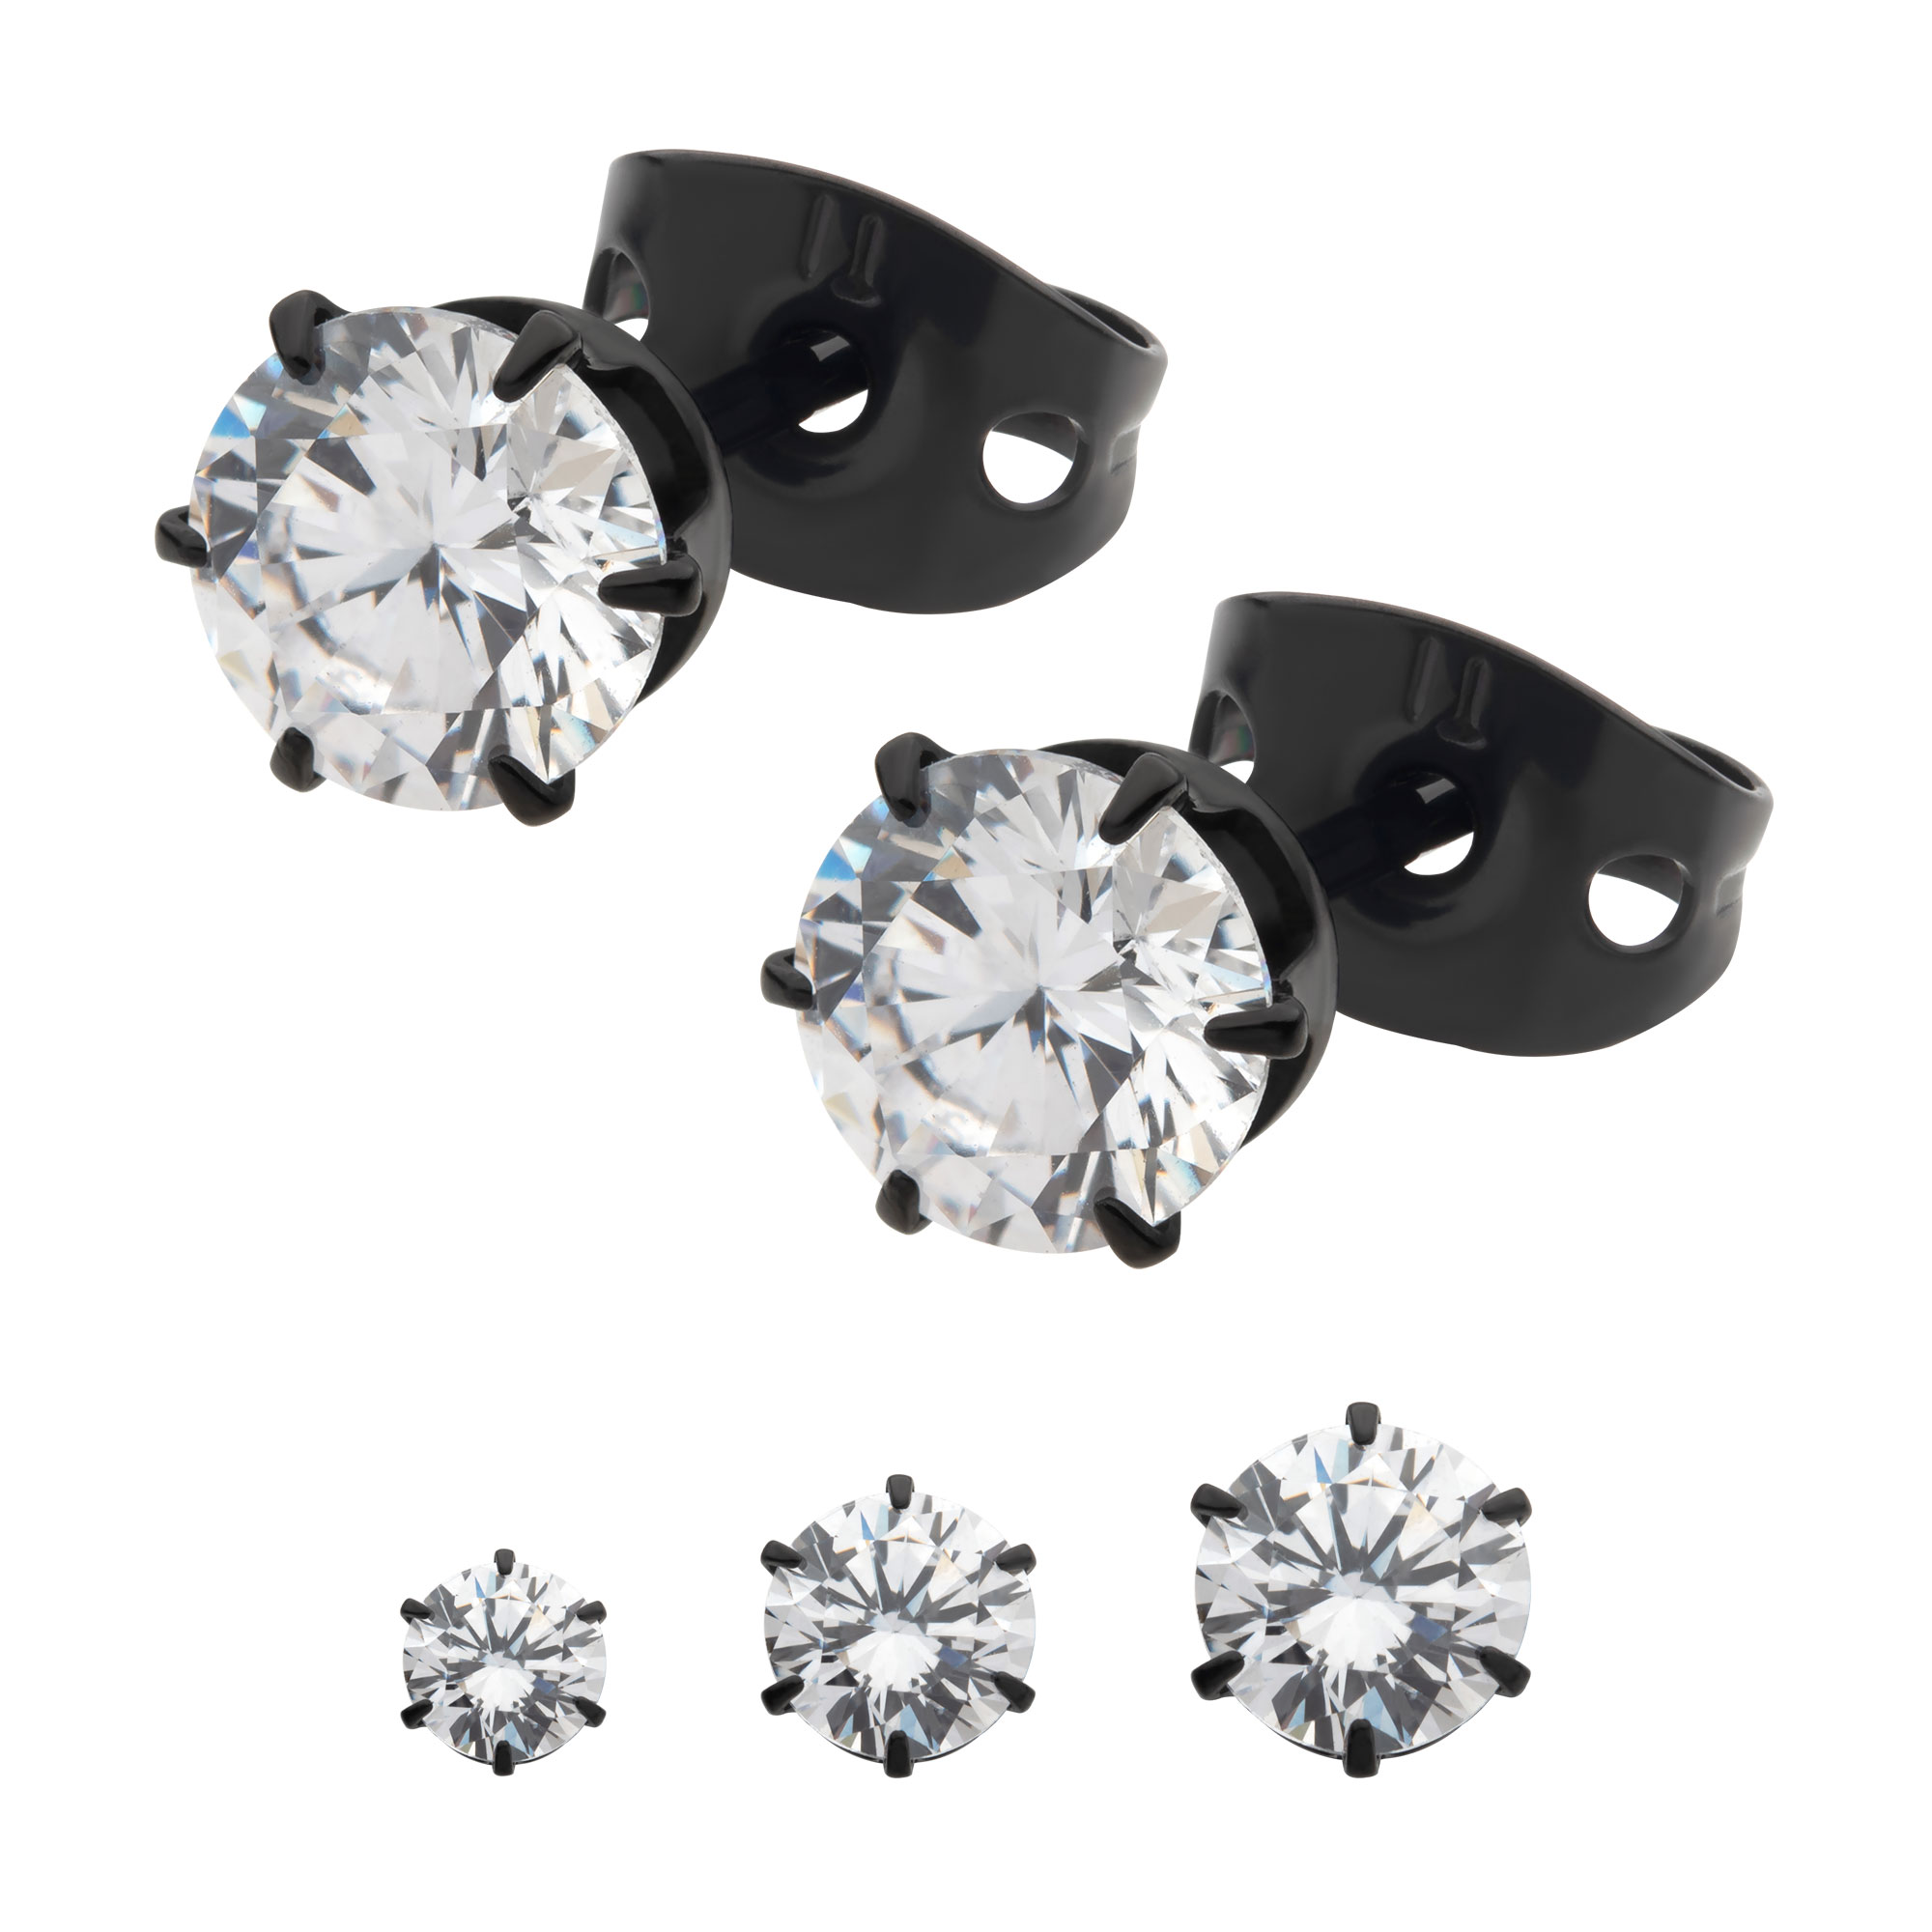 20g Black Plated Titanium Post and Butterfly Back with 6-Prong Set CZ Stud Earrings Morin Jewelers Southbridge, MA